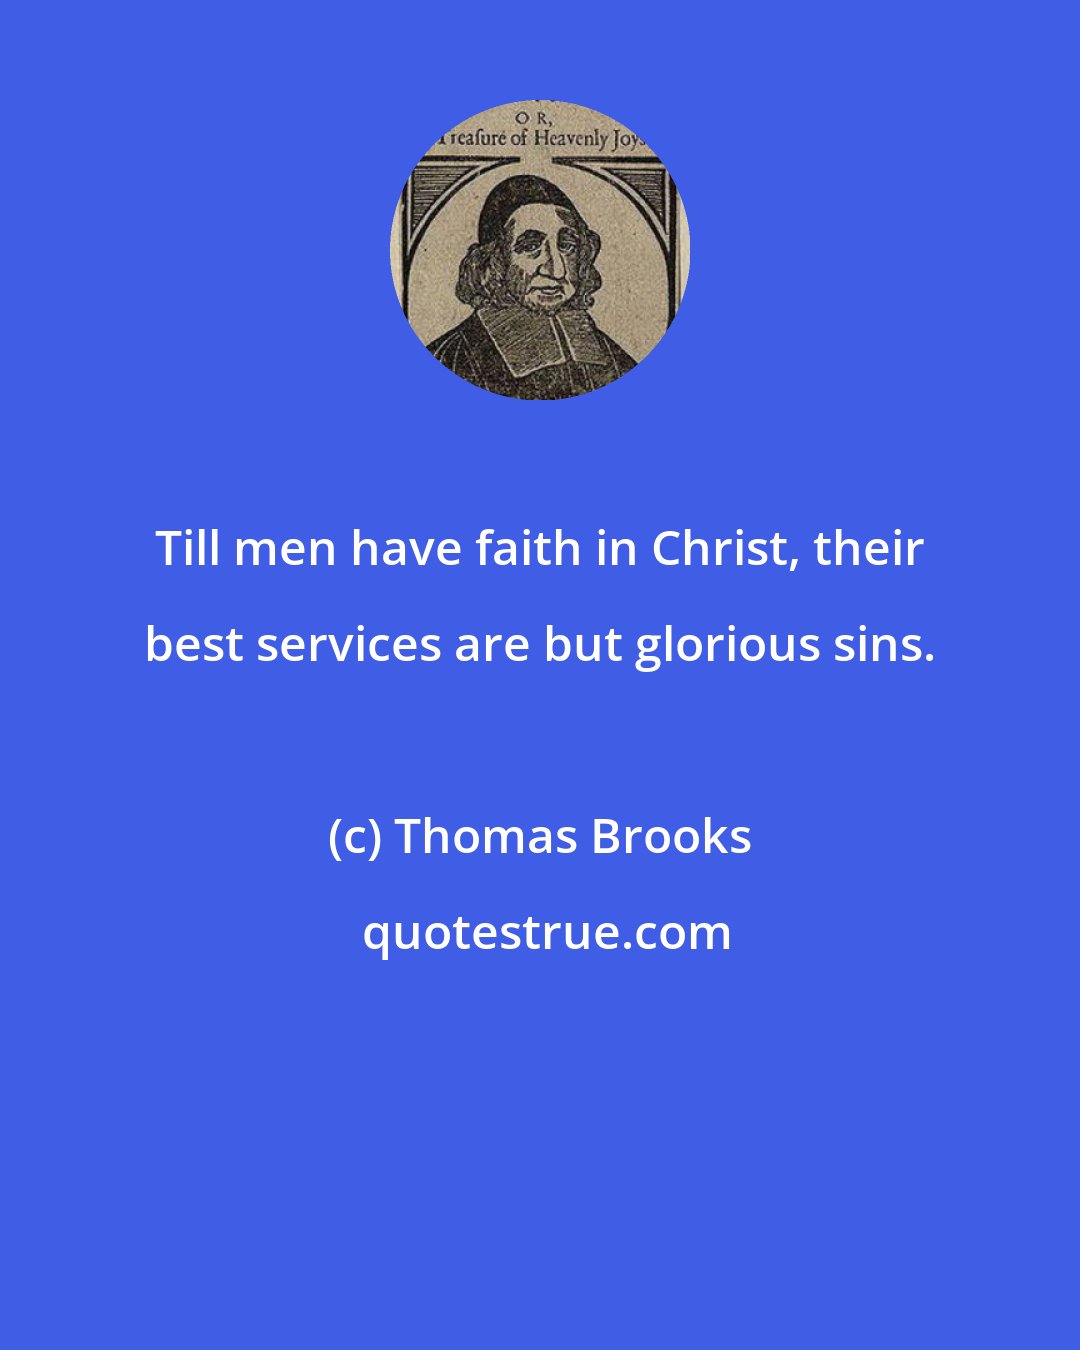 Thomas Brooks: Till men have faith in Christ, their best services are but glorious sins.